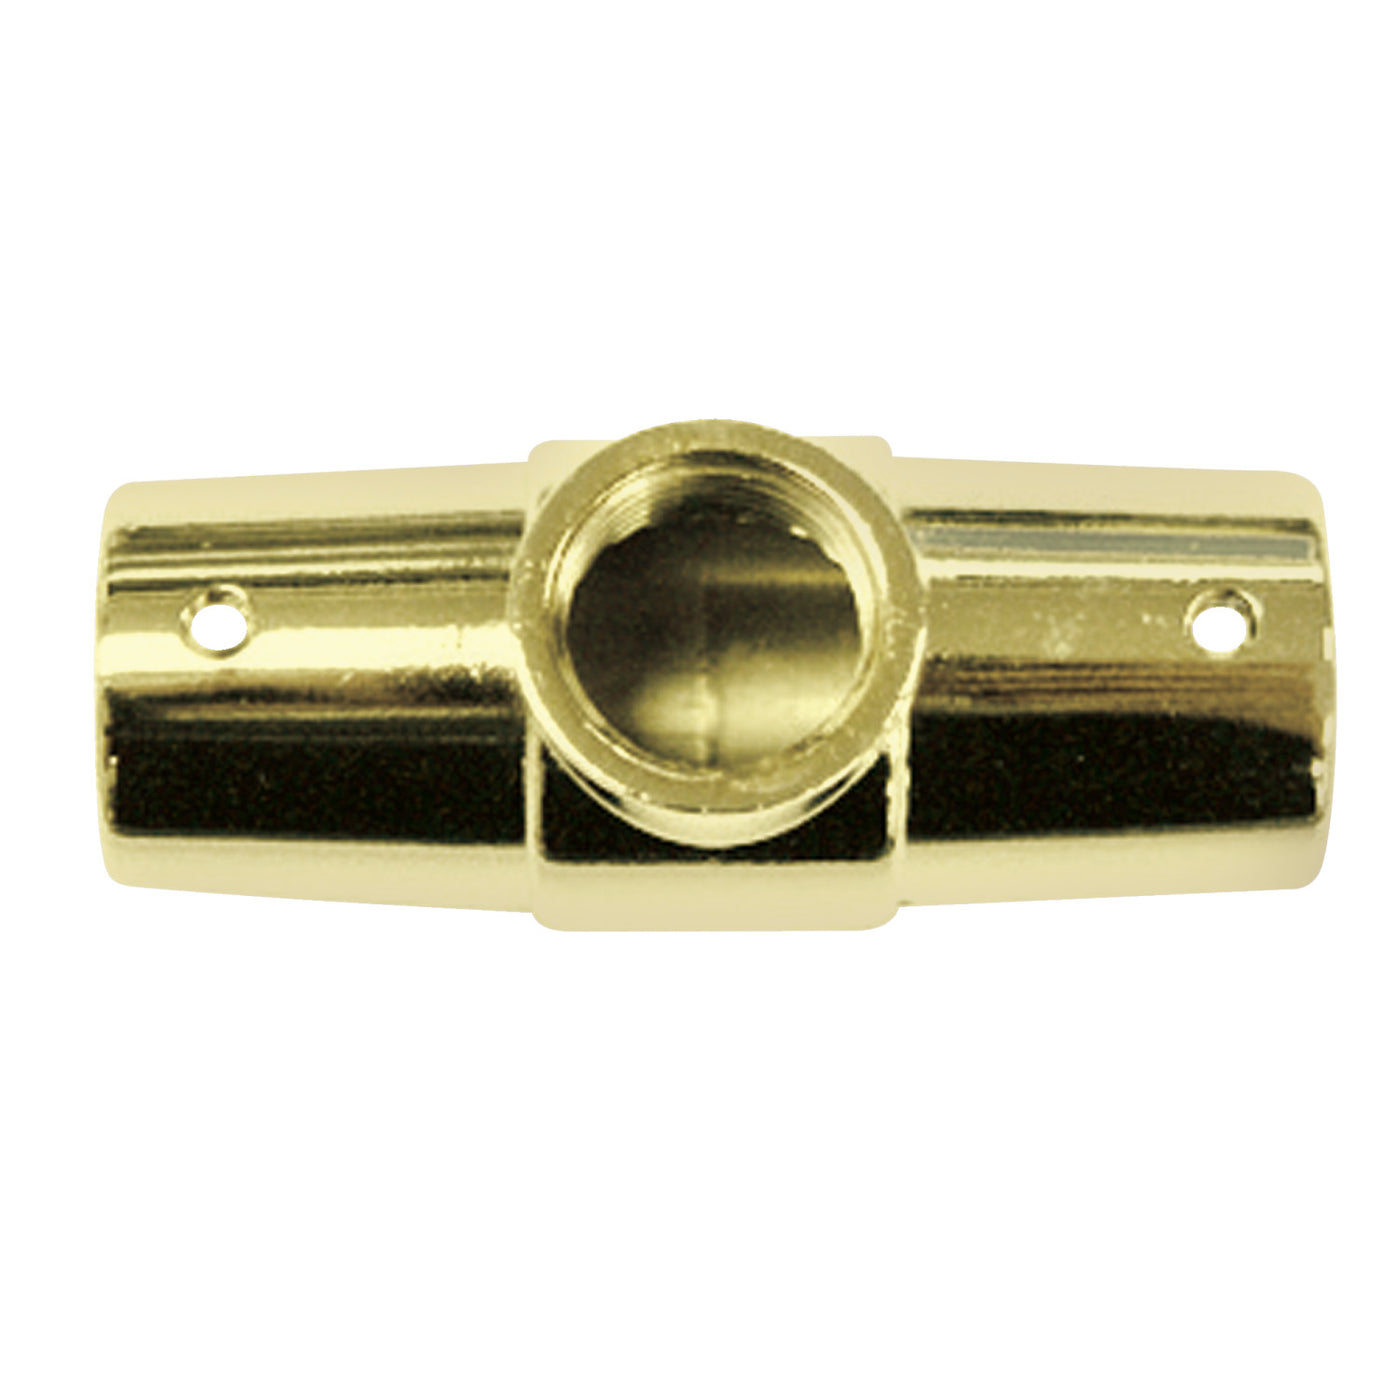 Elements of Design EDRCA2 Shower Ring Connector 3 Holes, Polished Brass